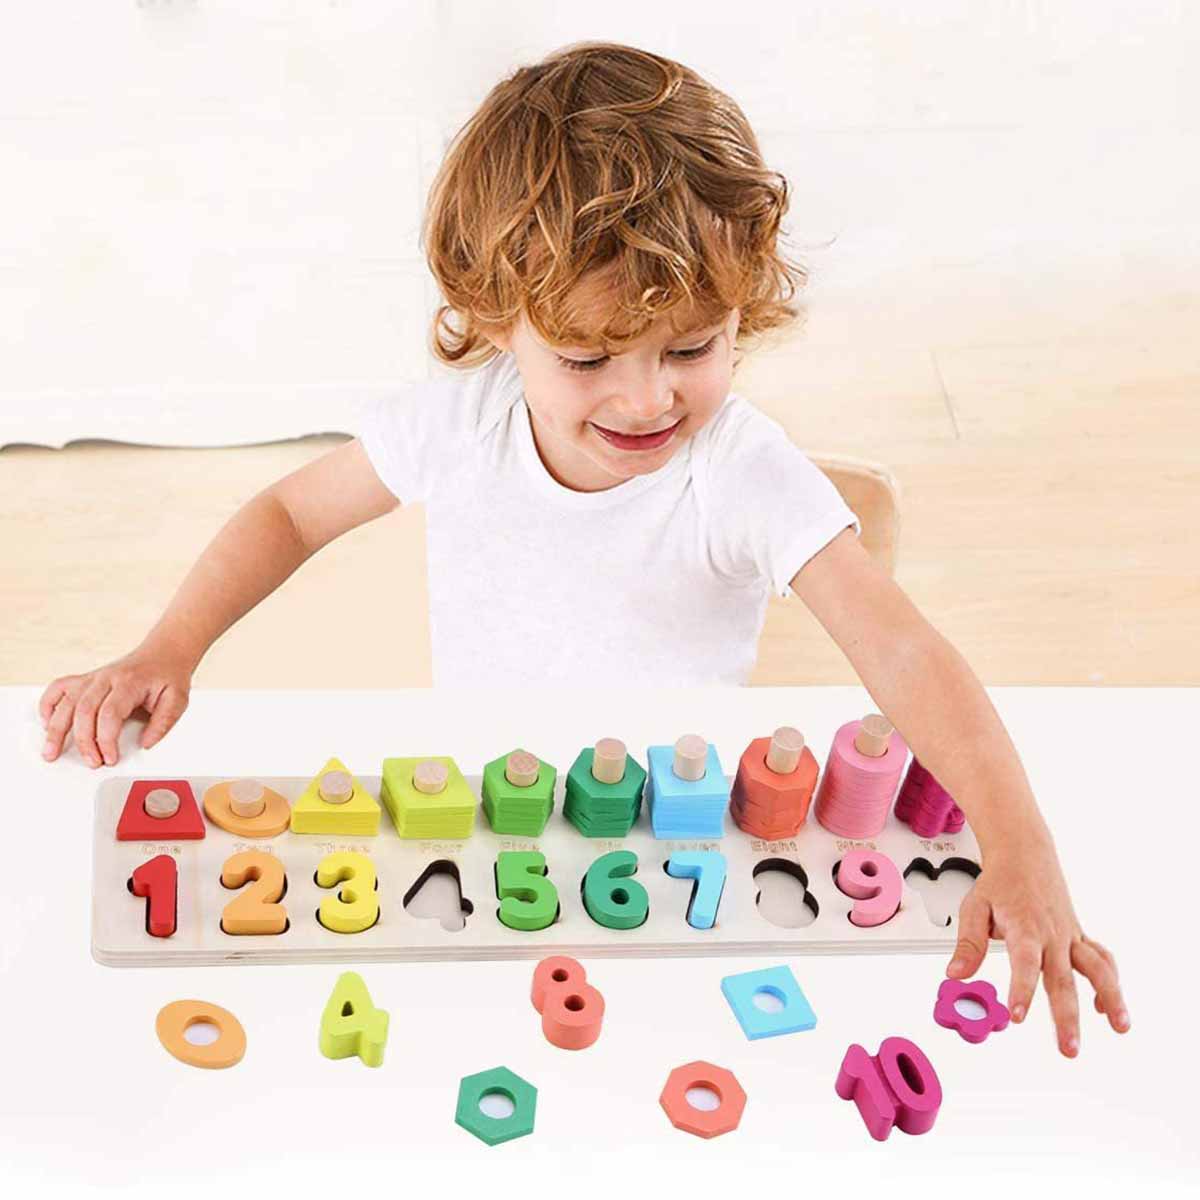 counting toy for young kids